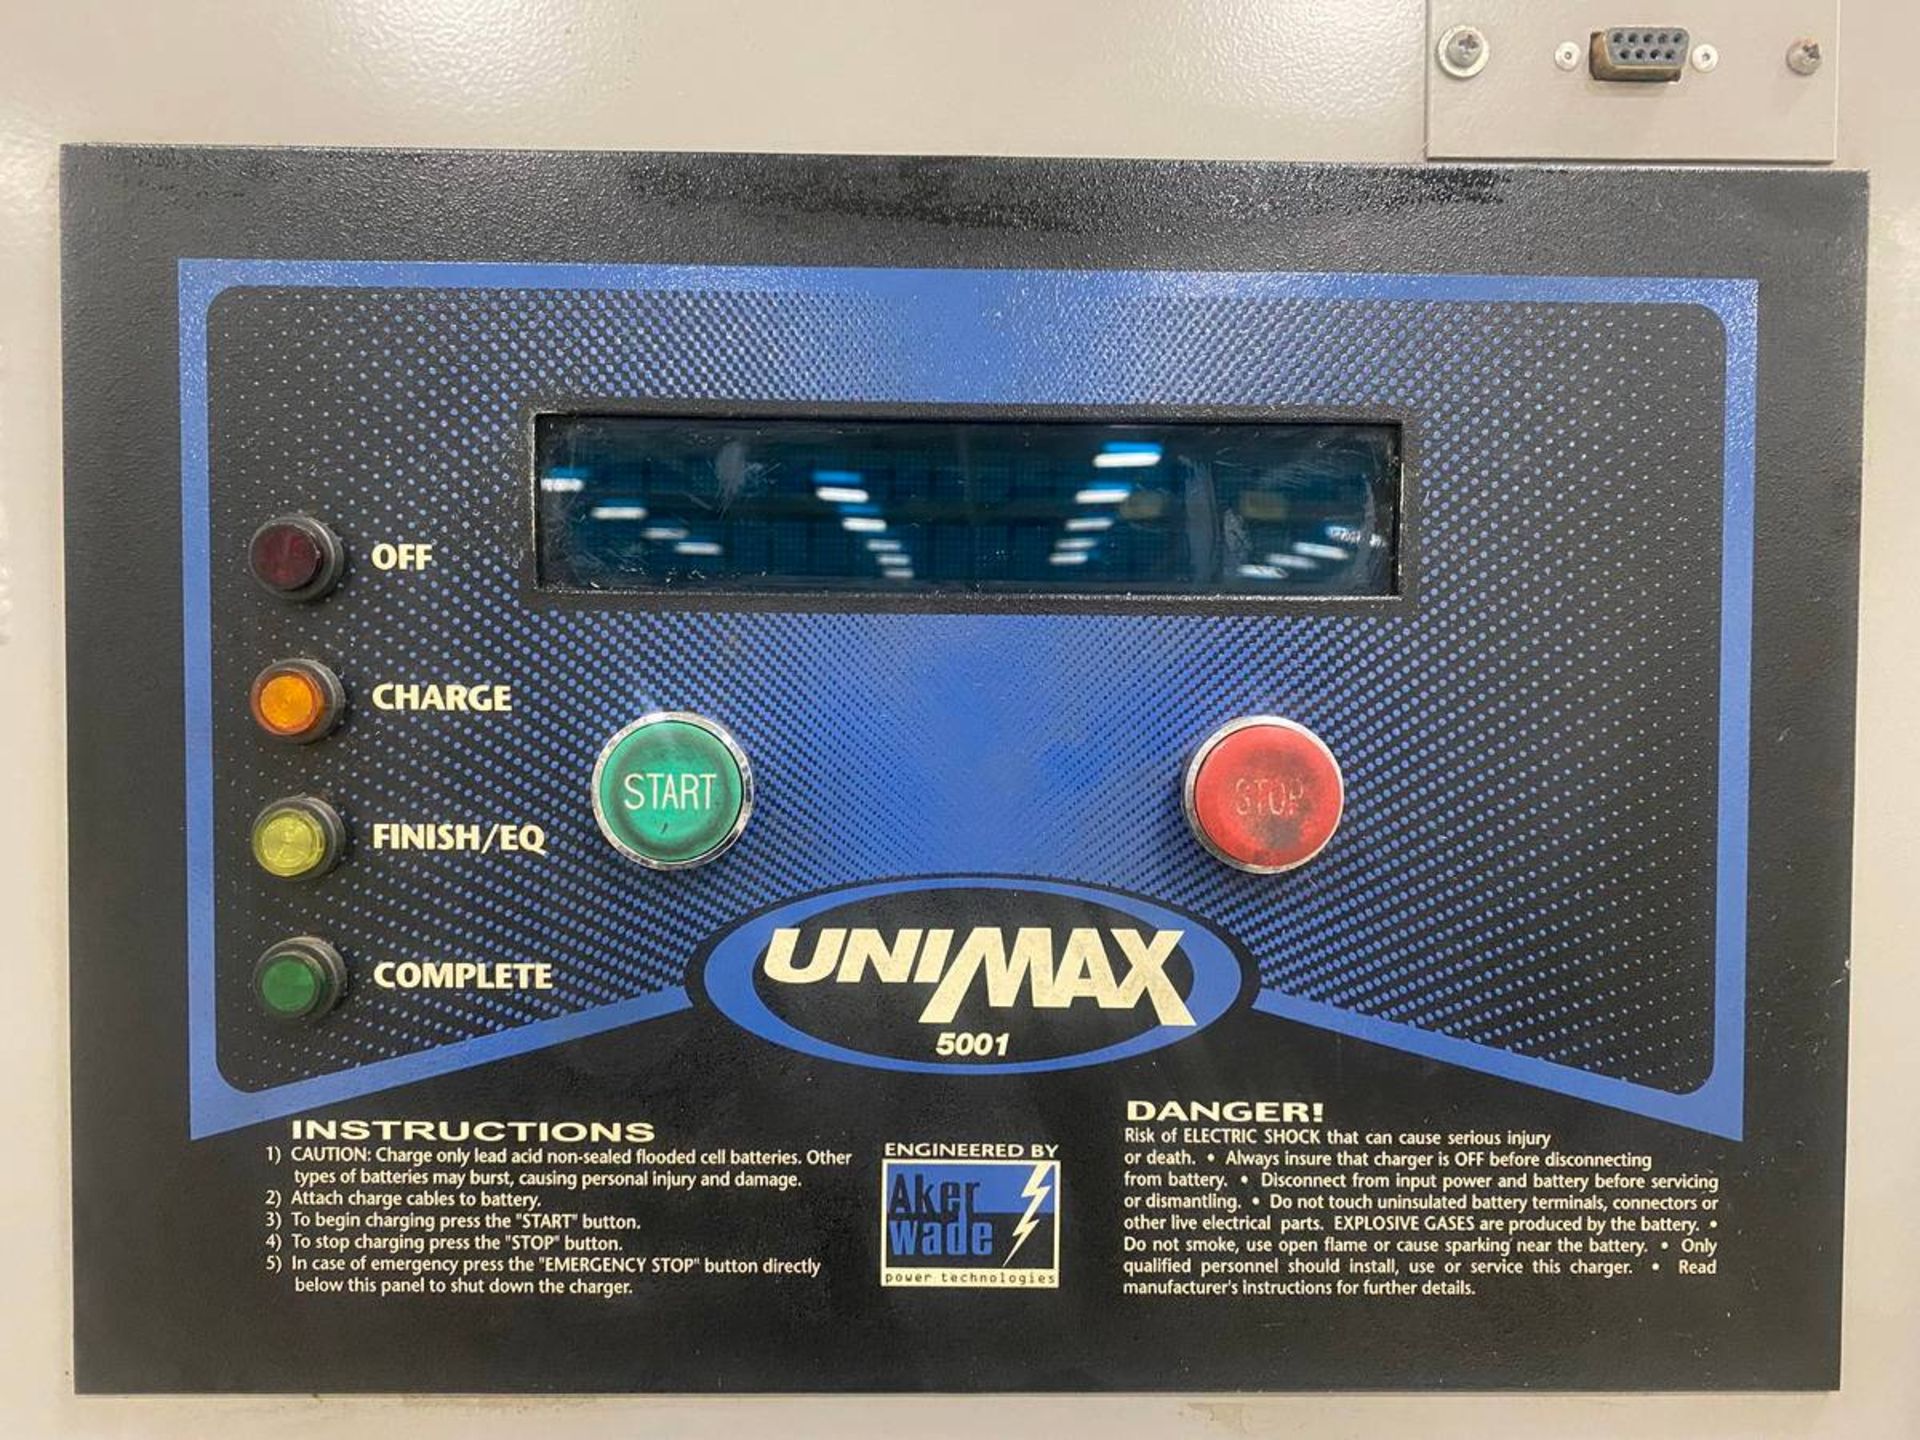 2005 Uni Max 500 6-40 Cells Battery Charger - Image 3 of 4